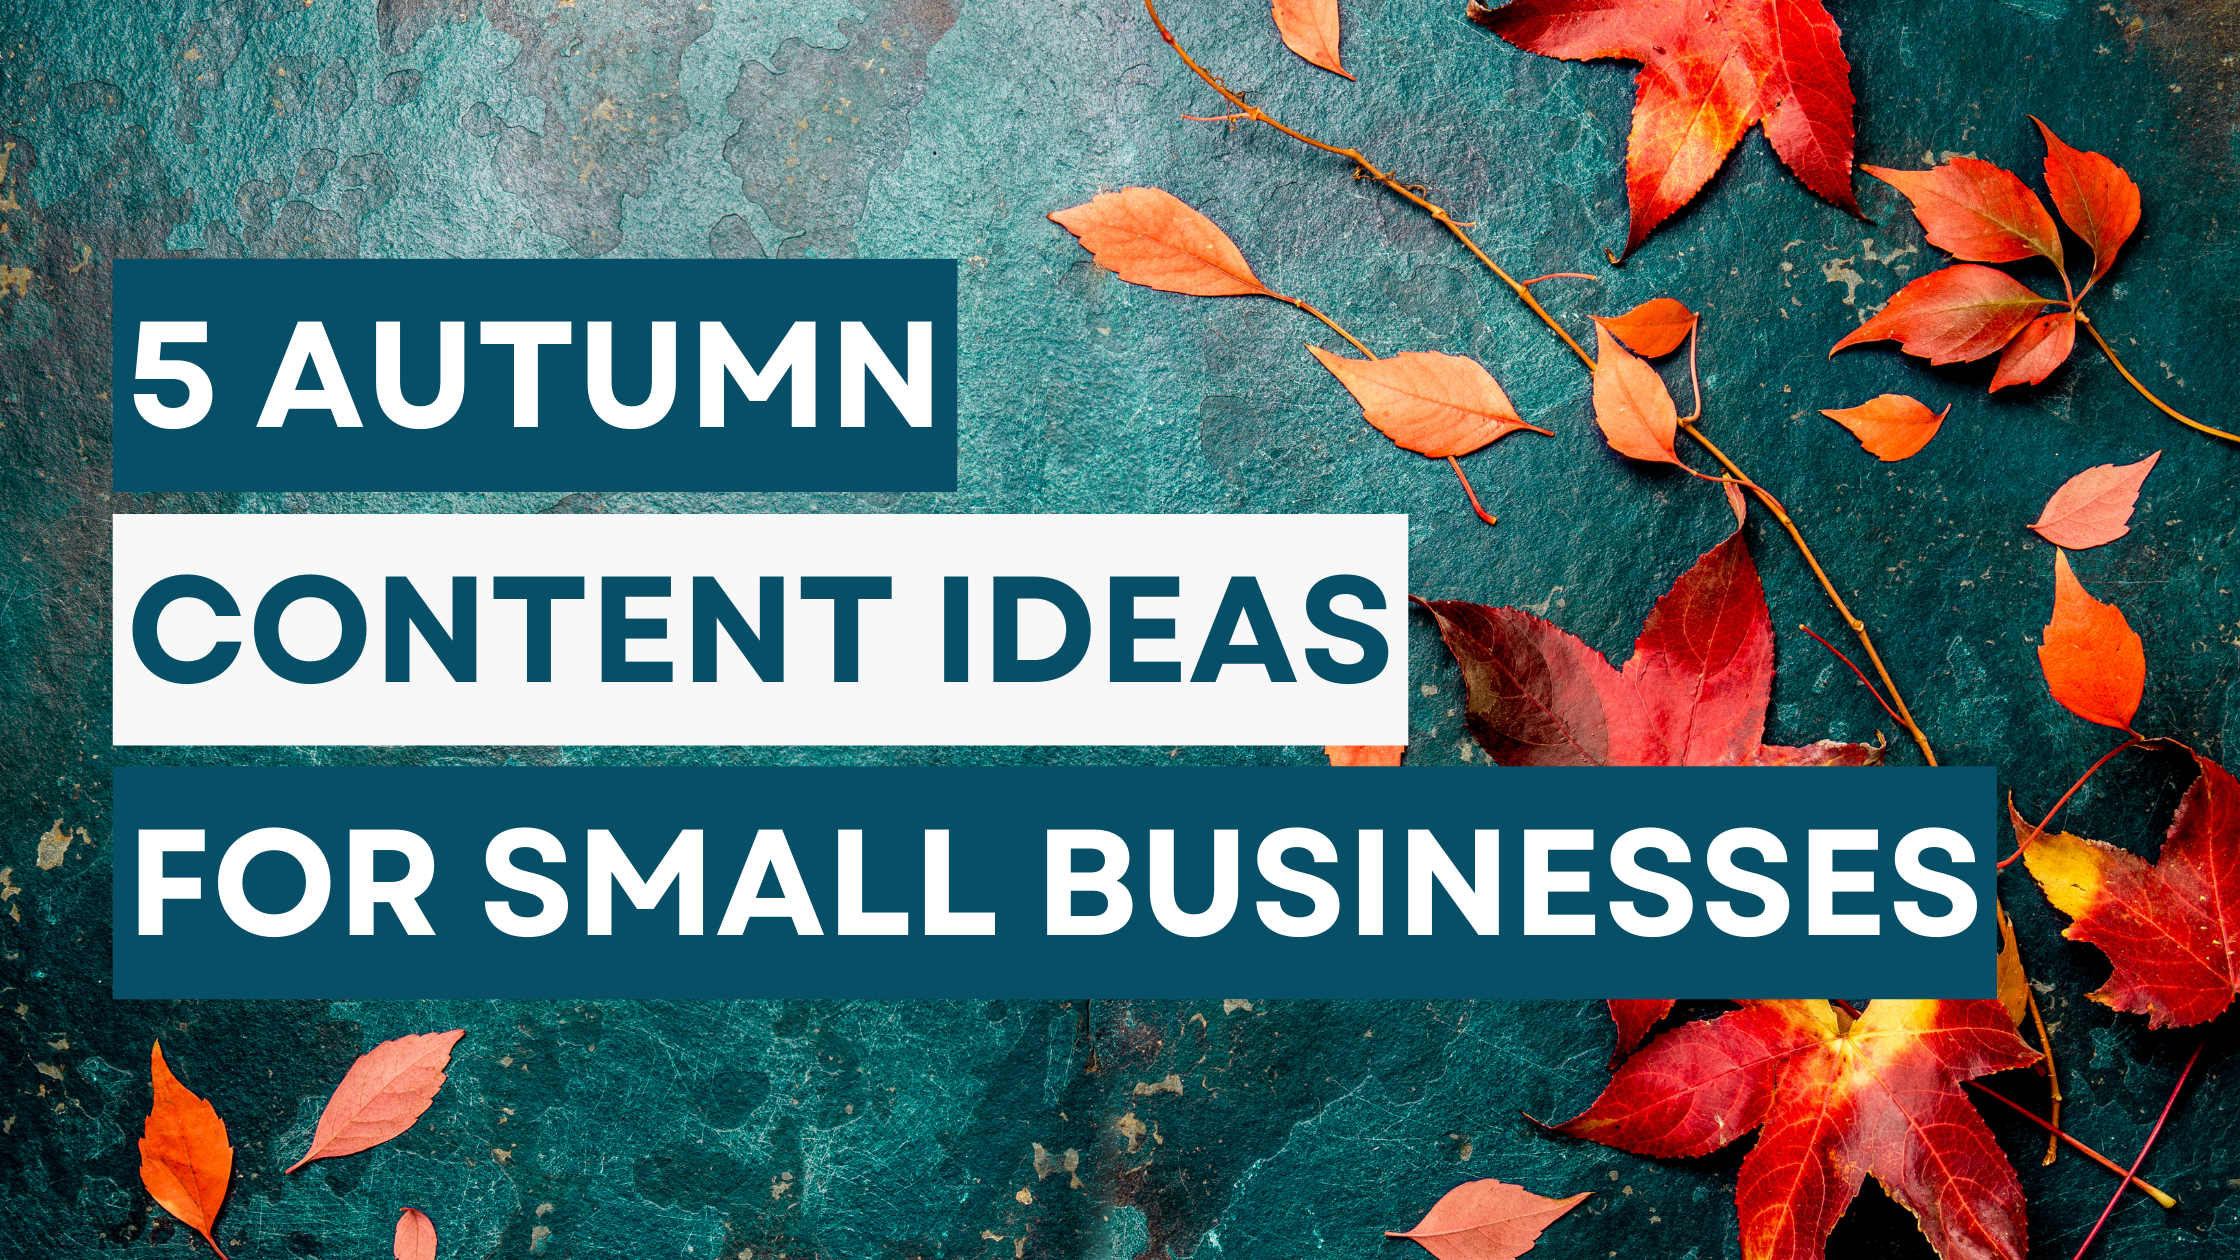 5 Autumn Content Ideas for Small Businesses